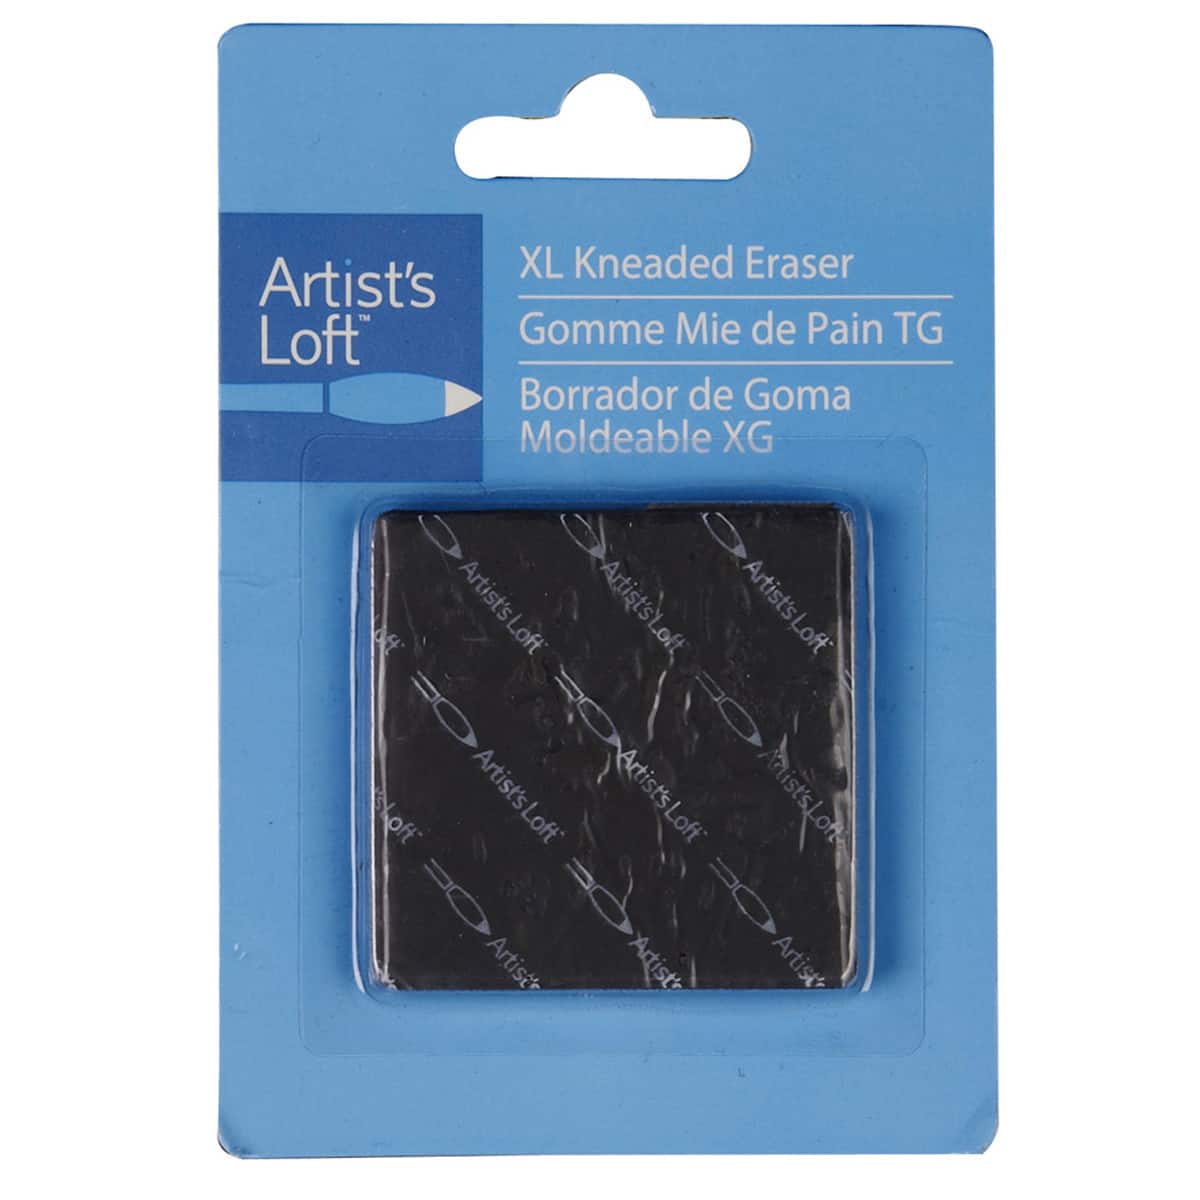 Kneaded Eraser - 12 Pack Kneaded Erasers for Artists - Erasers Medium Size  Art Eraser, Kneaded Erasers for Artists, Great for Sketching, Drawing and